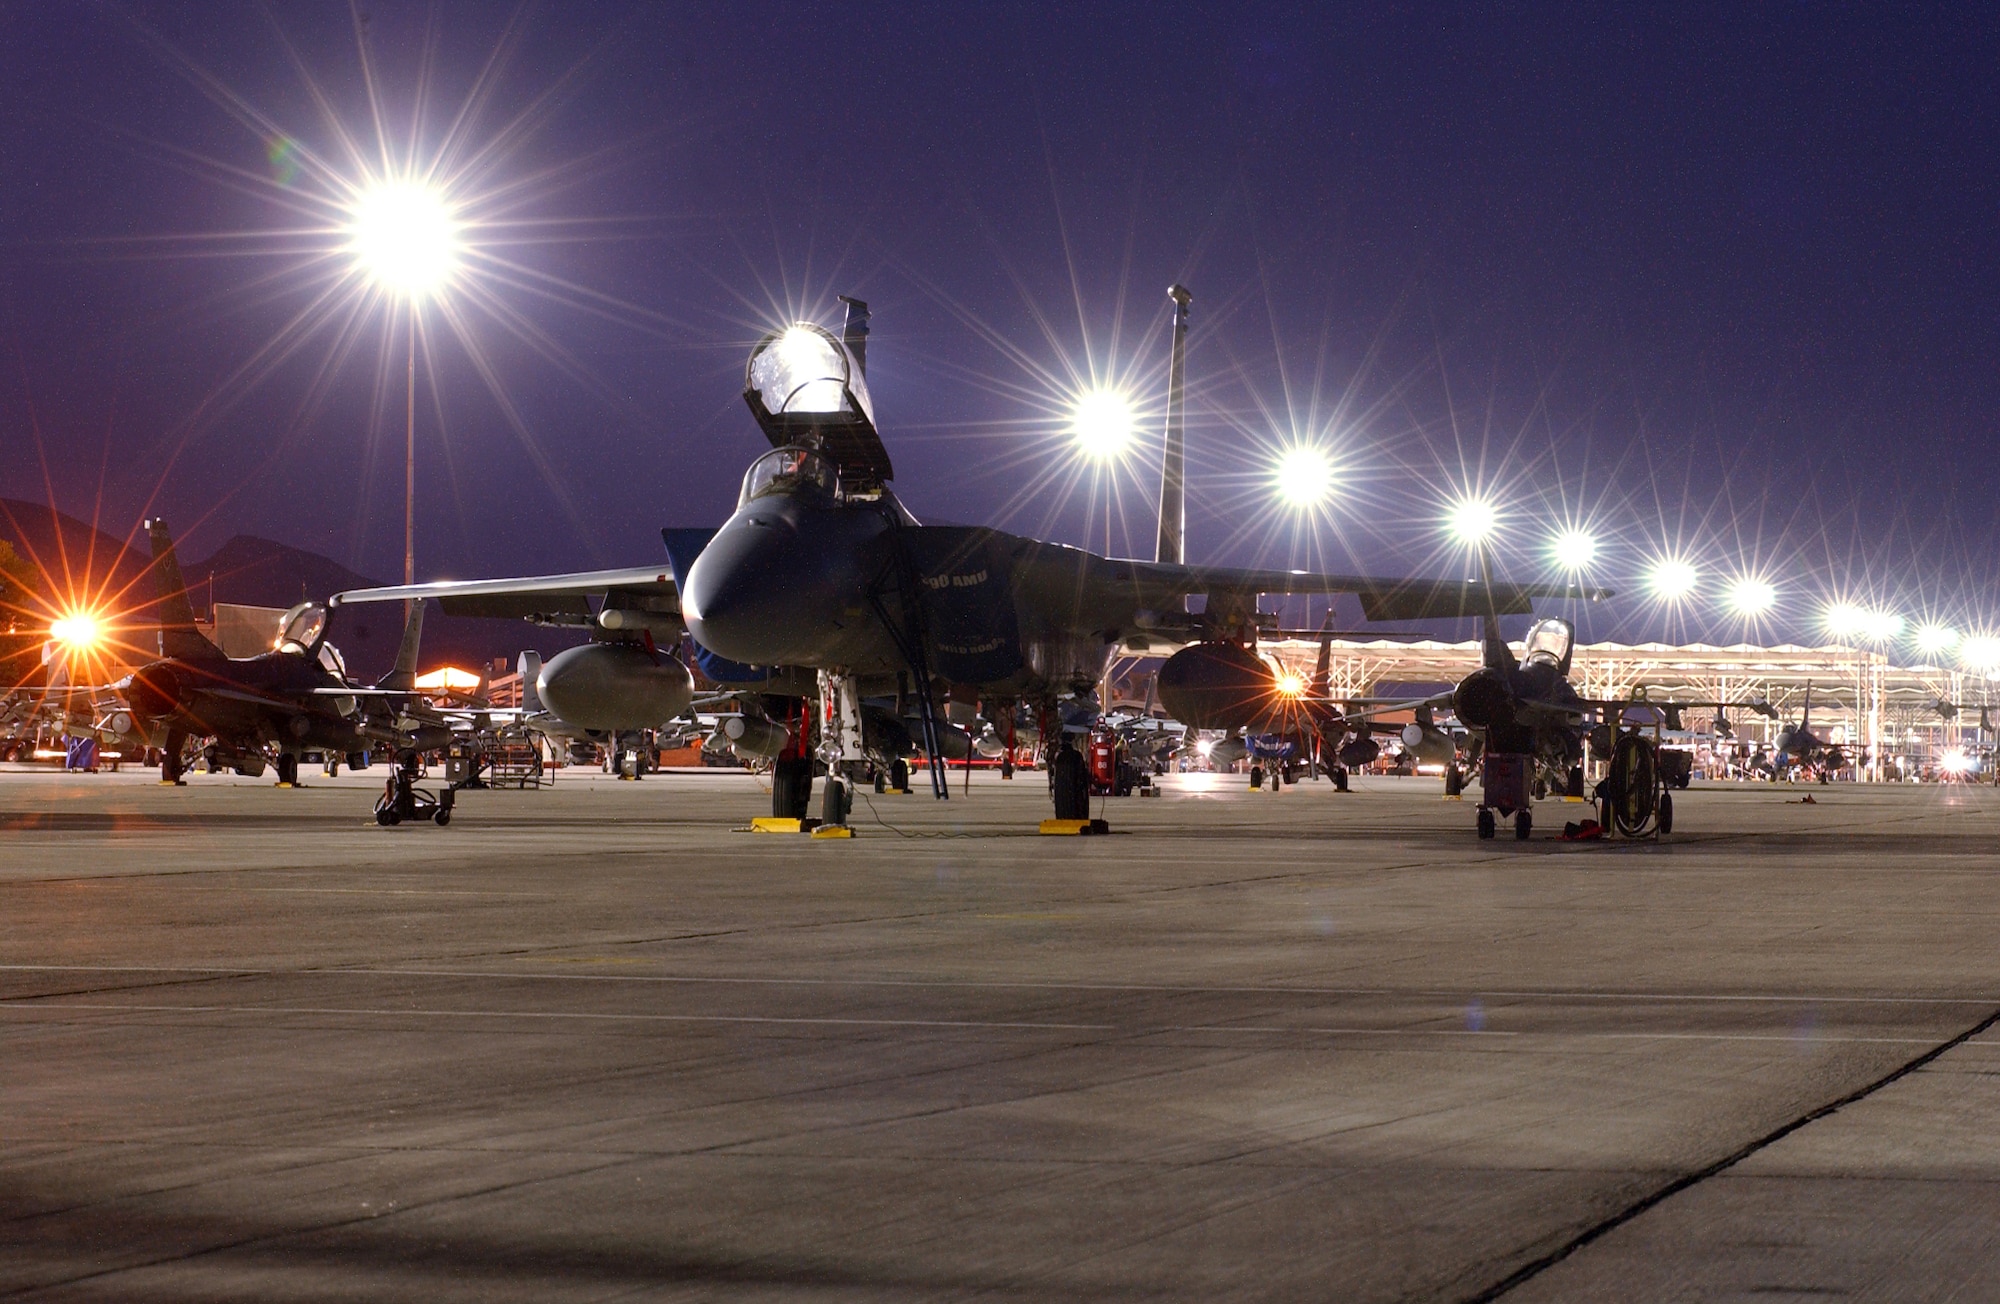 F-15 Eagles and F-16 Fighting Falcons await night missions at Nellis Air Force, Nev., Oct 19. The Red Flag exercise ended flying operations Oct. 20. The U.S. Air Force Weapons School continues to ramp up its training flights as it prepares for the integration and mission employment phases in November and early December. The next Green Flag exercise begins Nov. 2, which sees Air Force fighters and bombers supporting large-scale Army training at Fort Irwin, Calif. The next Red Flag exercises in January and February will feature the first appearance of the F-22A Raptor in the world's most realistic large-force aerial combat training. (U.S. Air Force photo by Airman First Class Brian Ybarbo)

 
